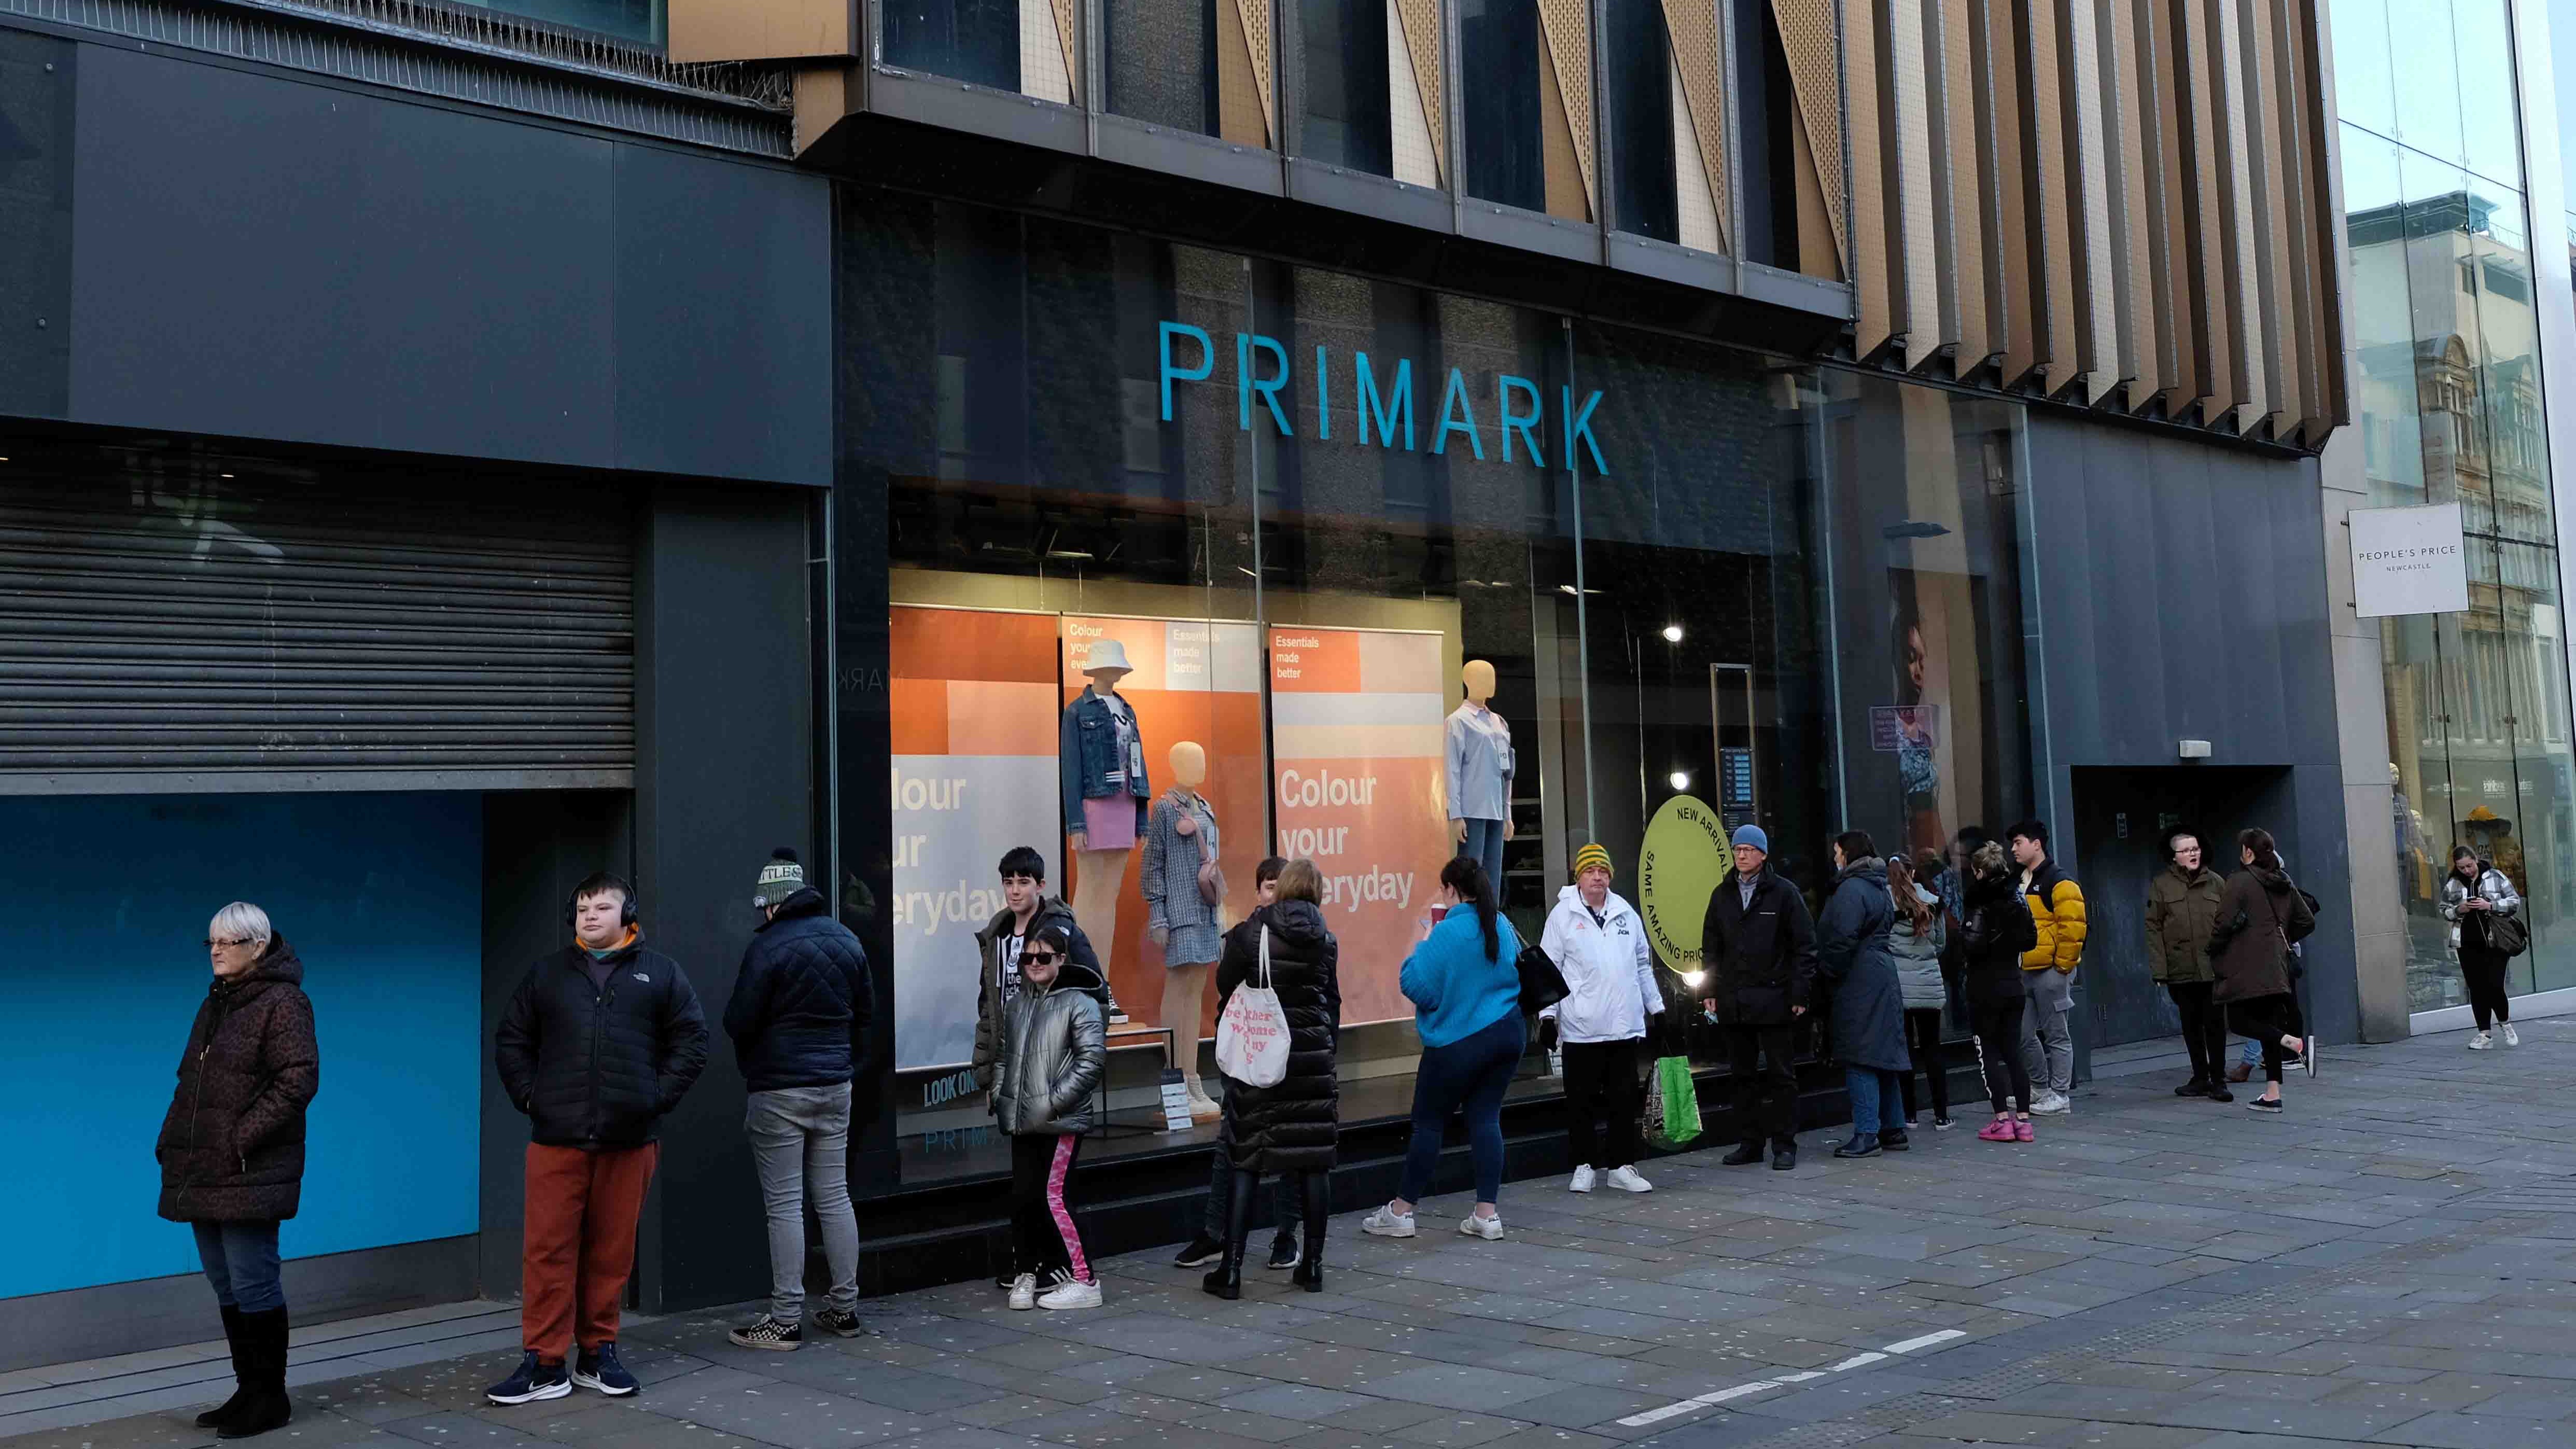 The items in the second Greggs x Primark collection - and where